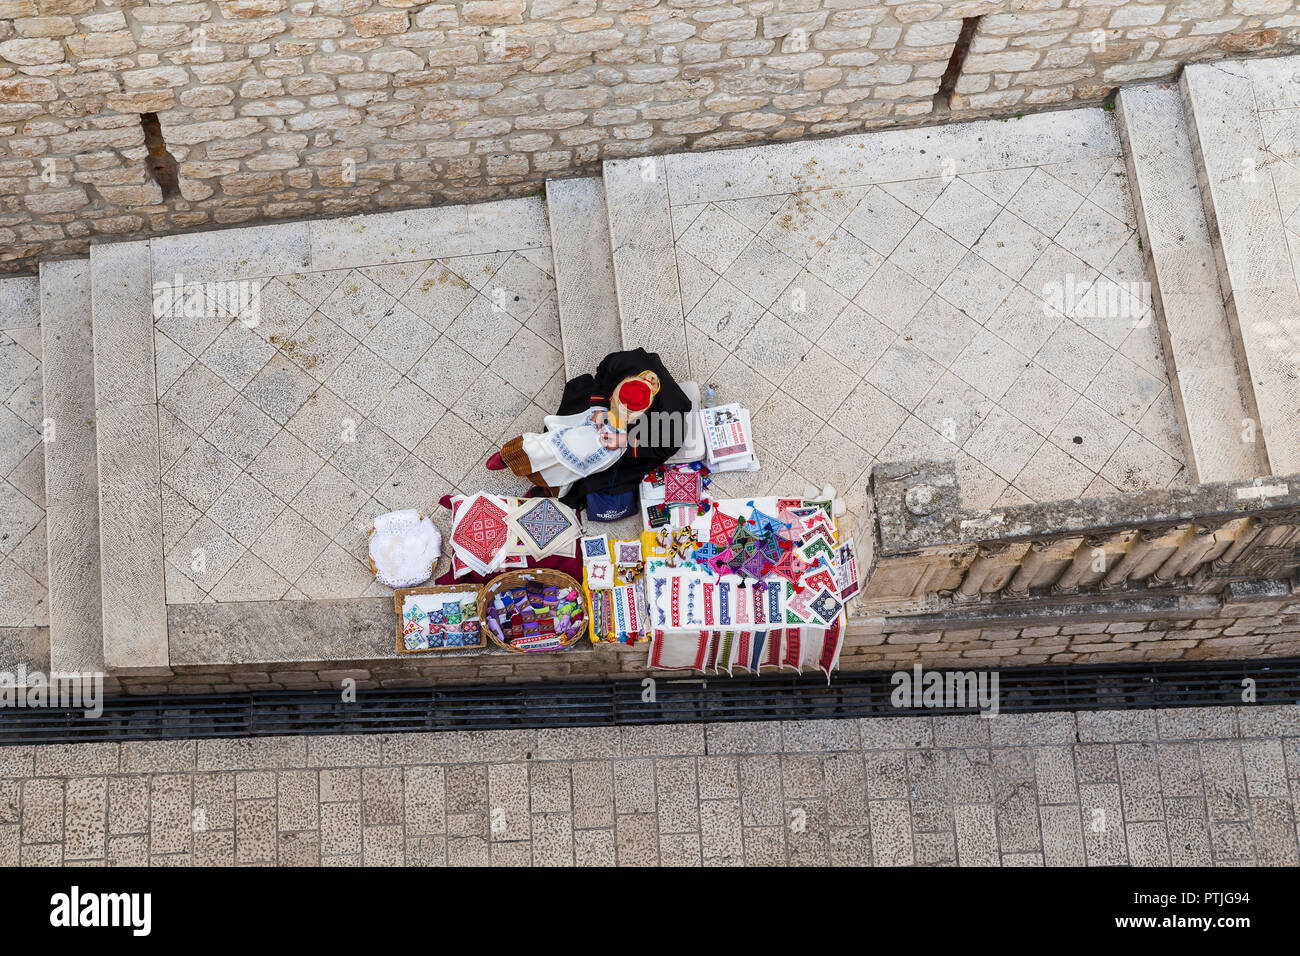 A woman sits on steps in Dubrovniks old town selling homemade souvenirs. Stock Photo